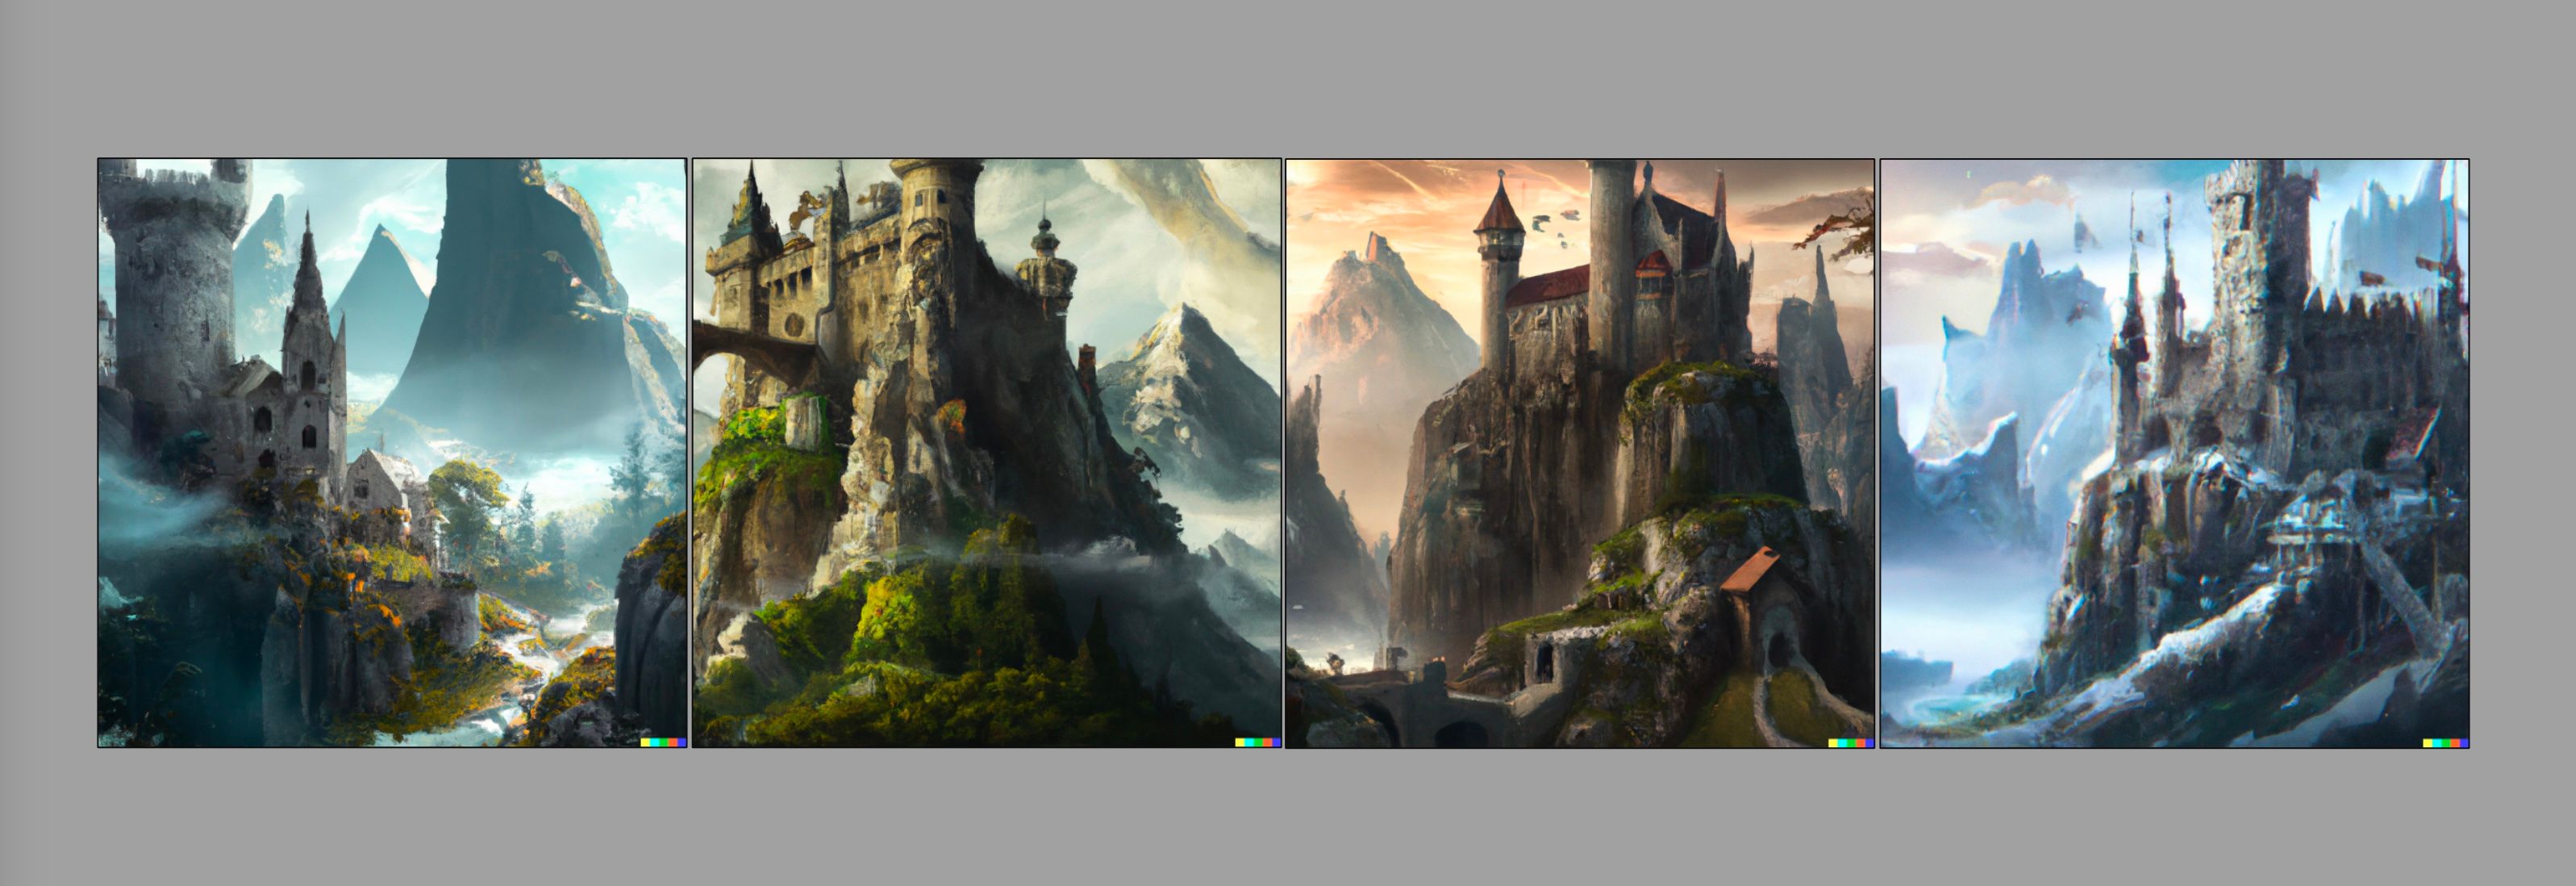 Four images of a medieval castle with mountains in the background, generated with Dall-E